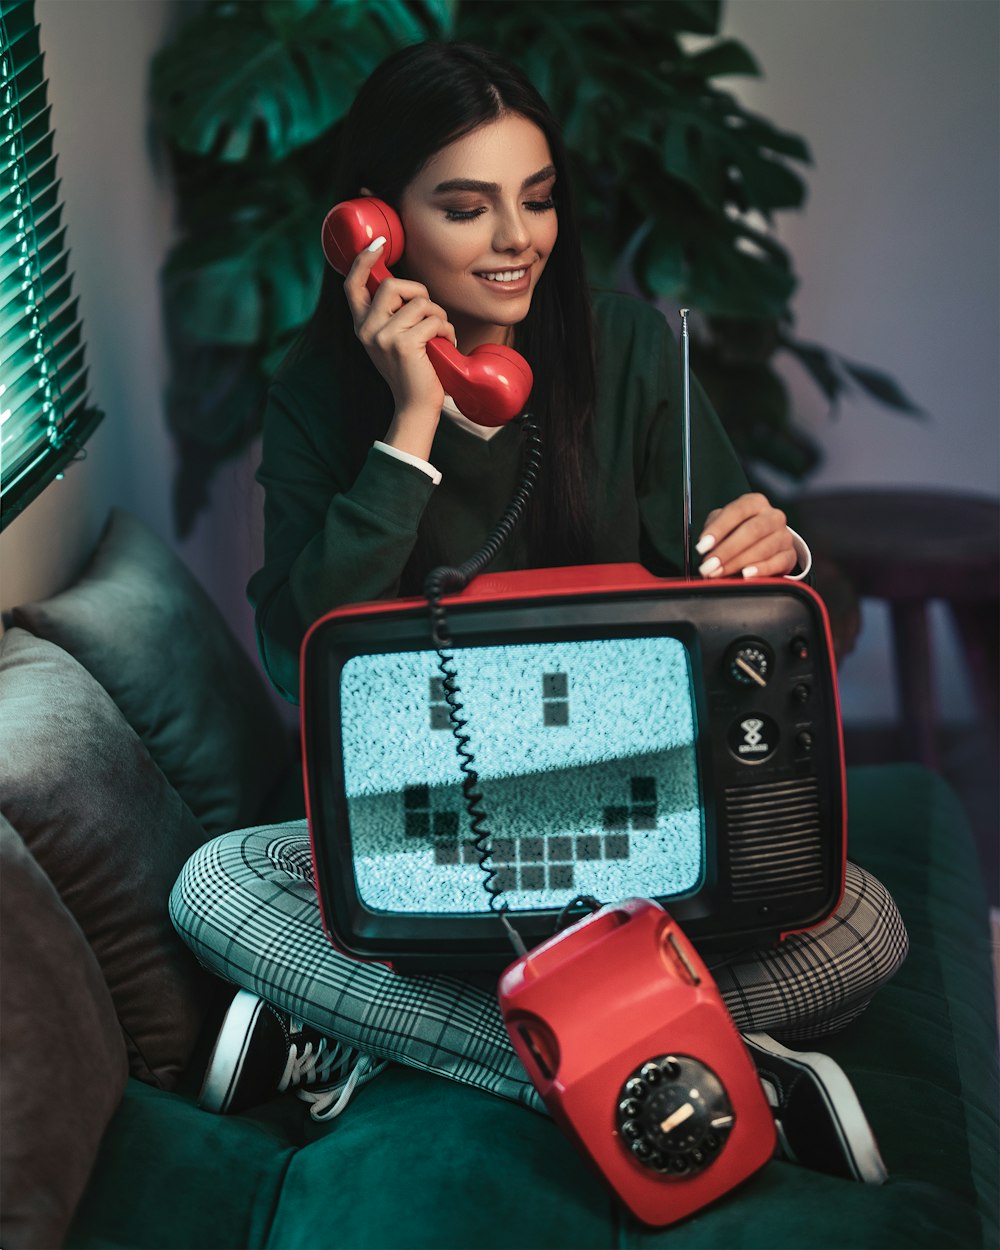 smiling woman sitting while using telephone and fixing antenna of radio